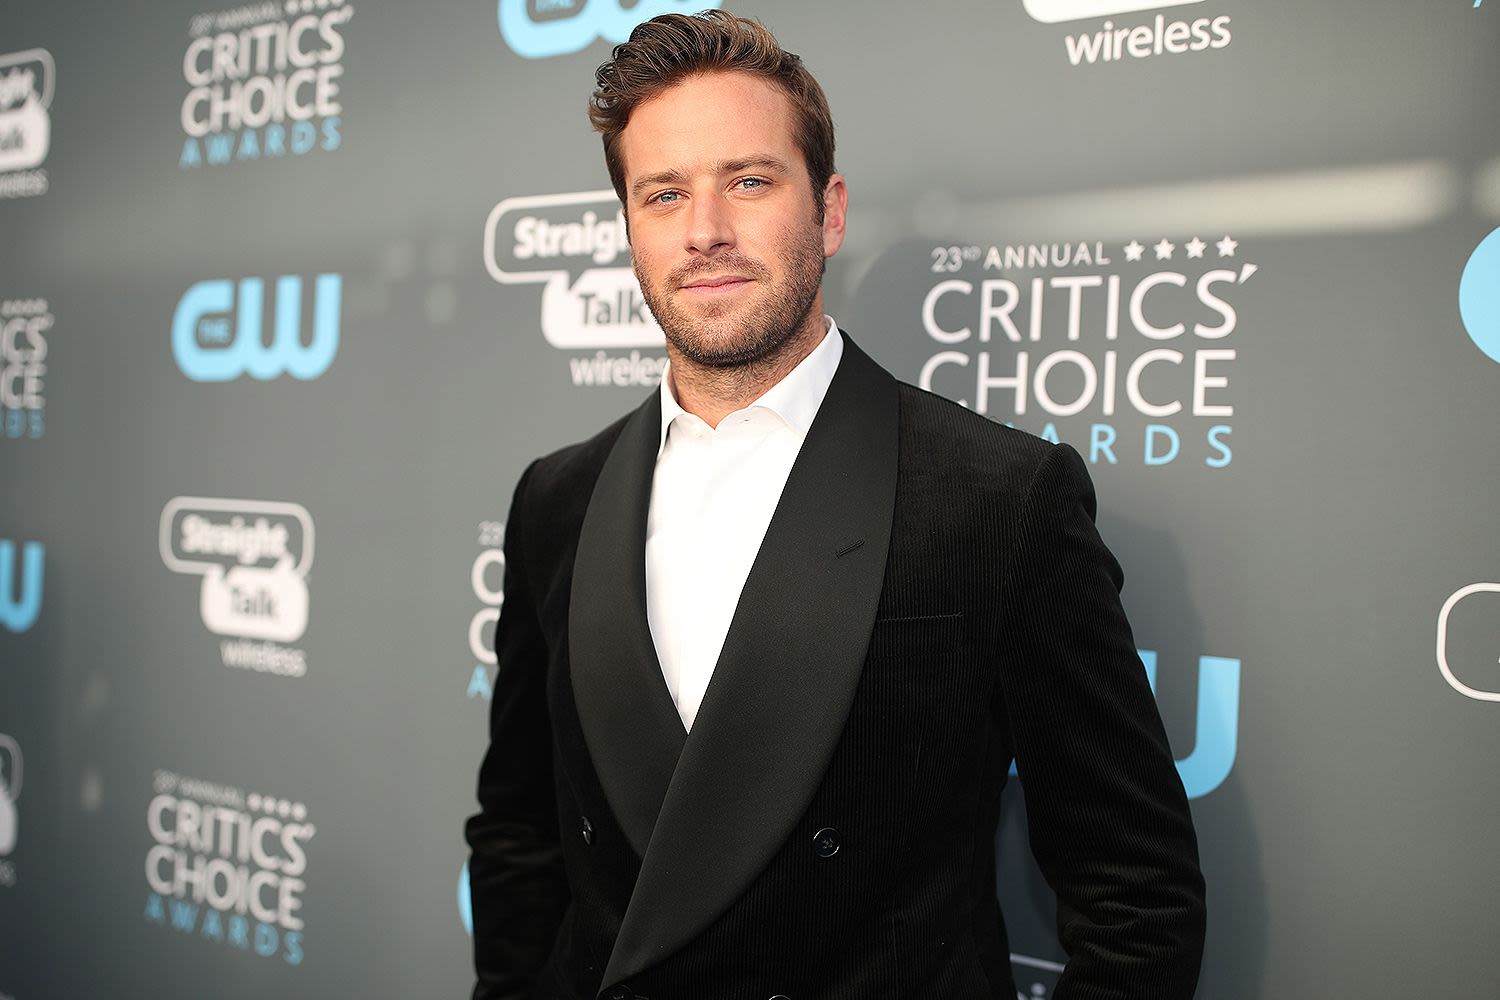 Armie Hammer Says He's 'Never Been Happier' After Scandal, Would Be Dead Without Therapy